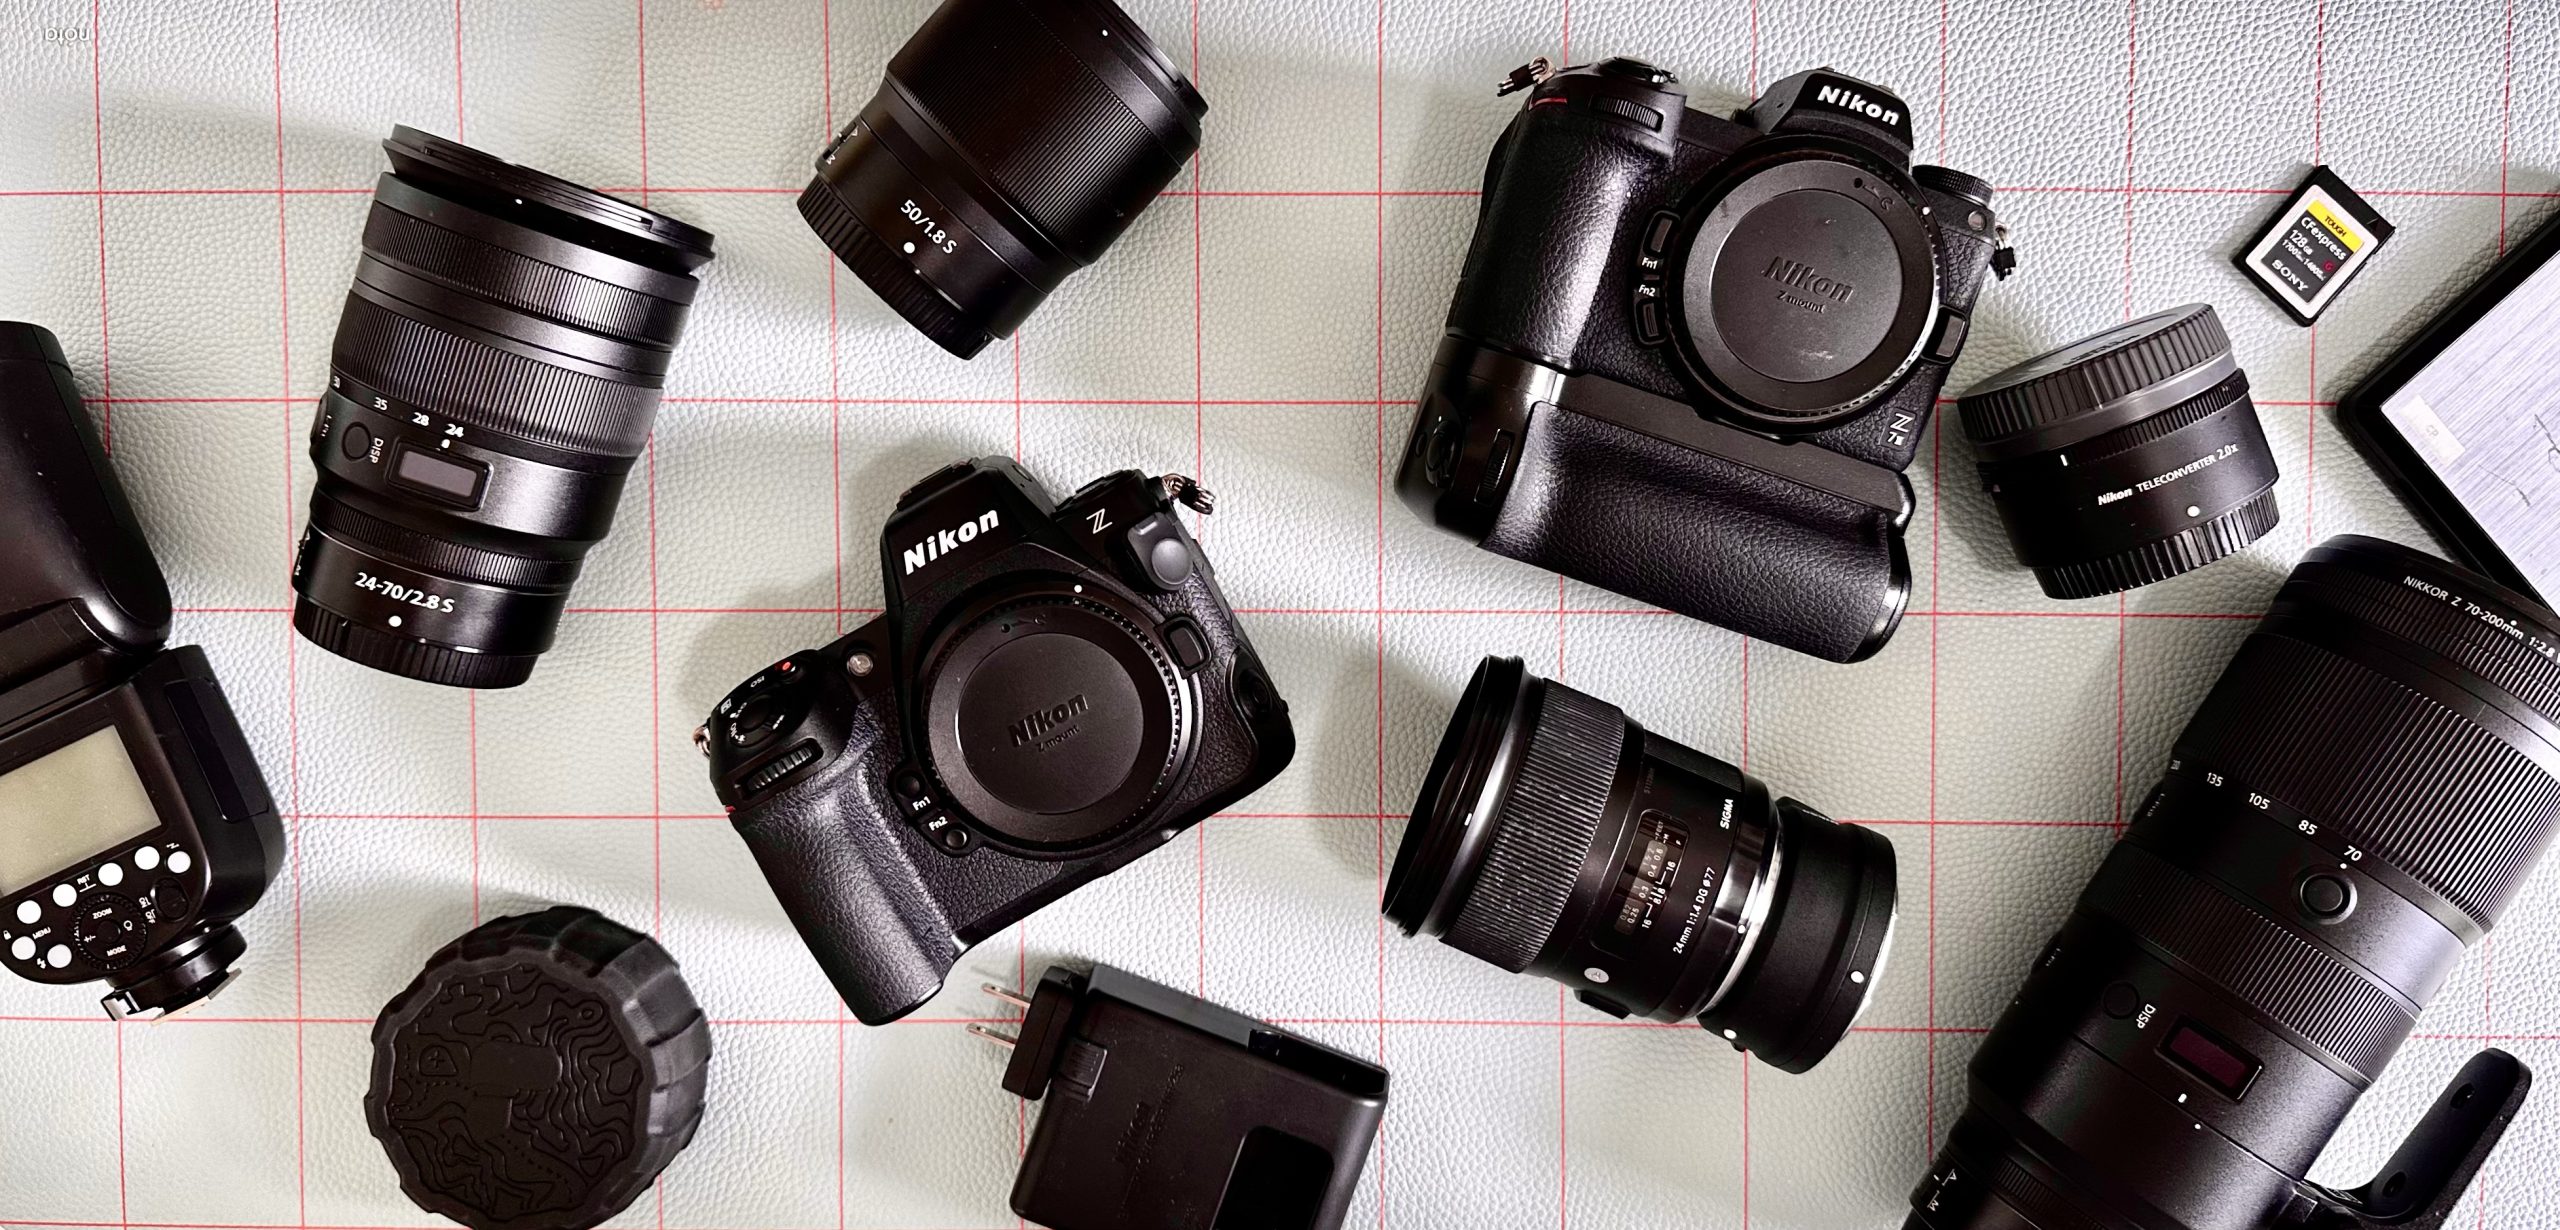 Nikon Z8 Real World pREVIEW: I WAS SO WRONG!!! 